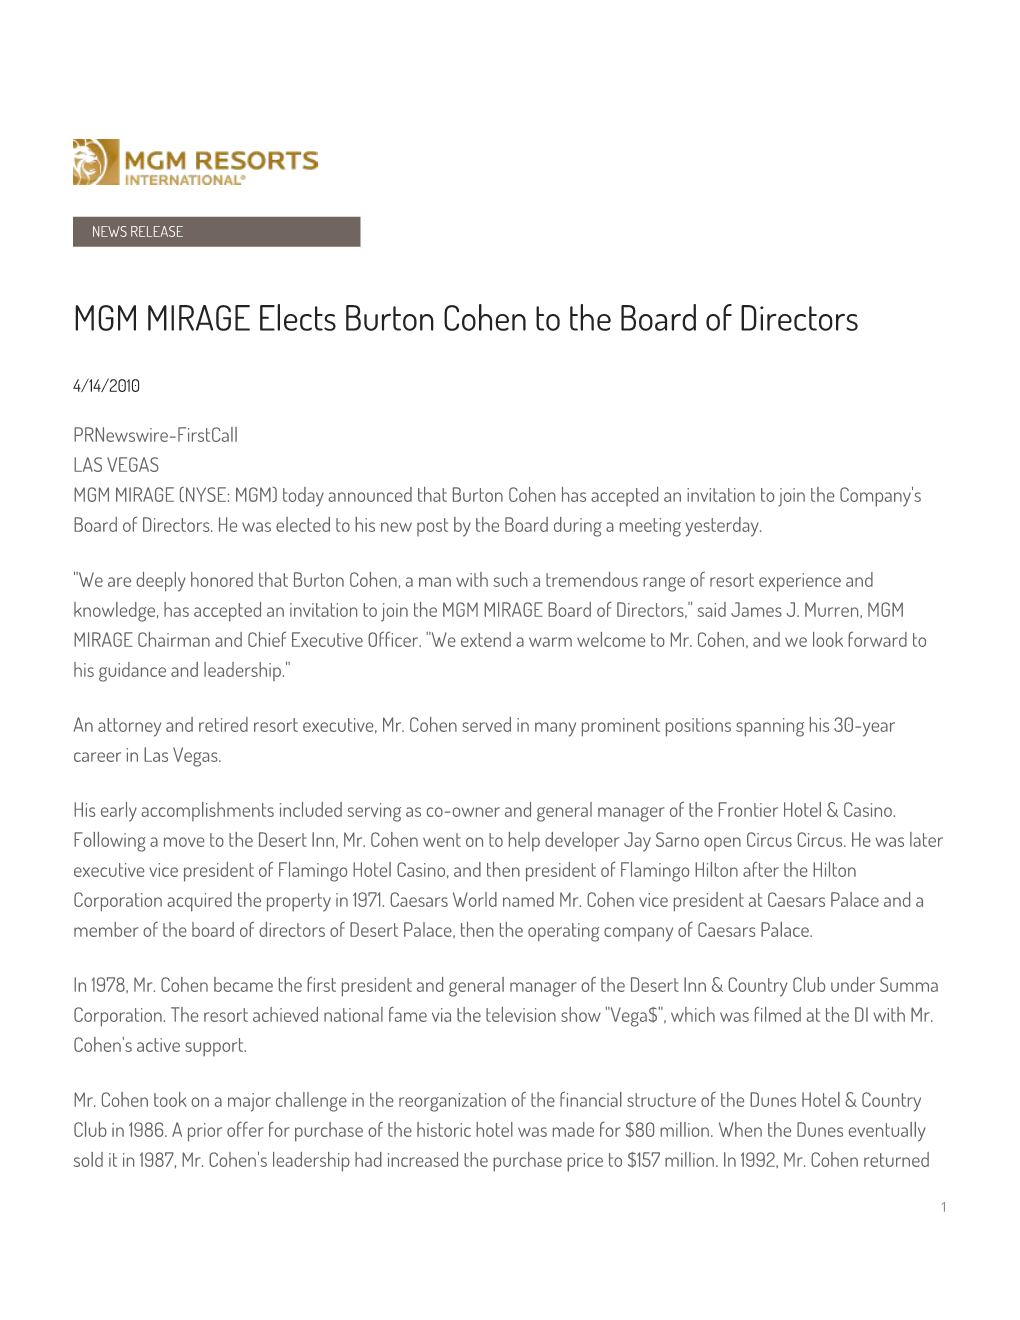 MGM MIRAGE Elects Burton Cohen to the Board of Directors